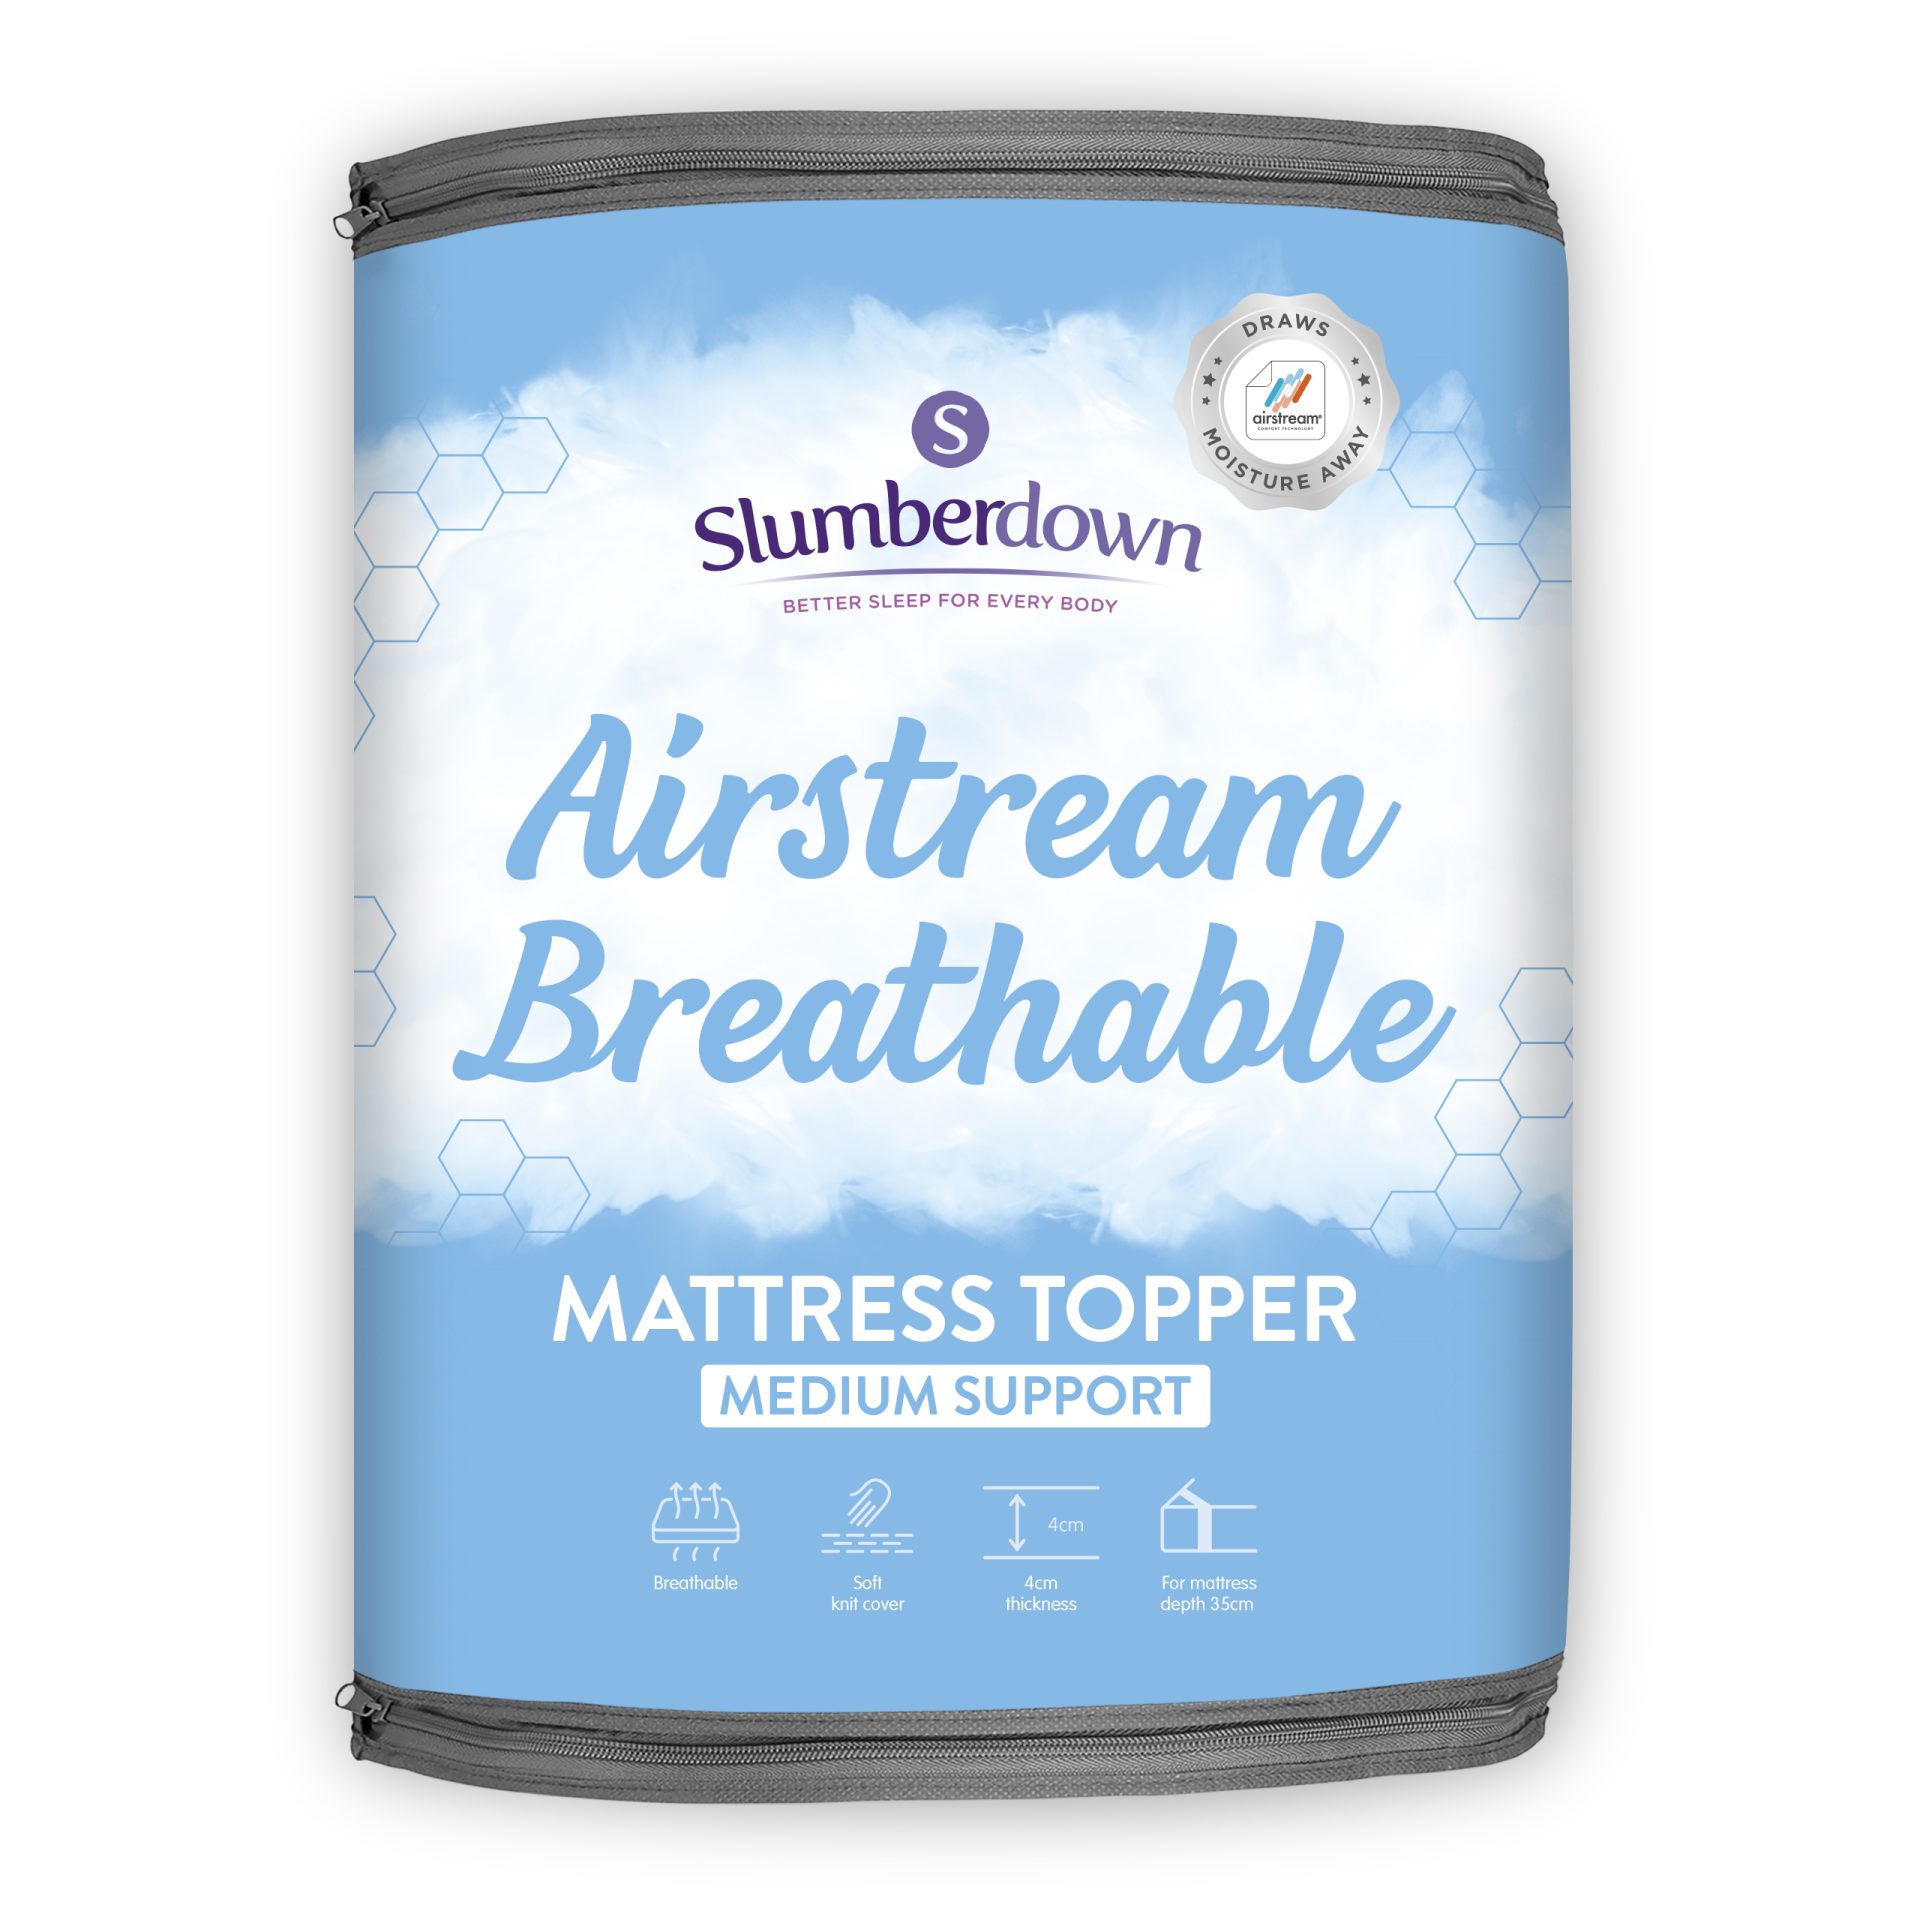 Breathable Airstream Mattress Topper